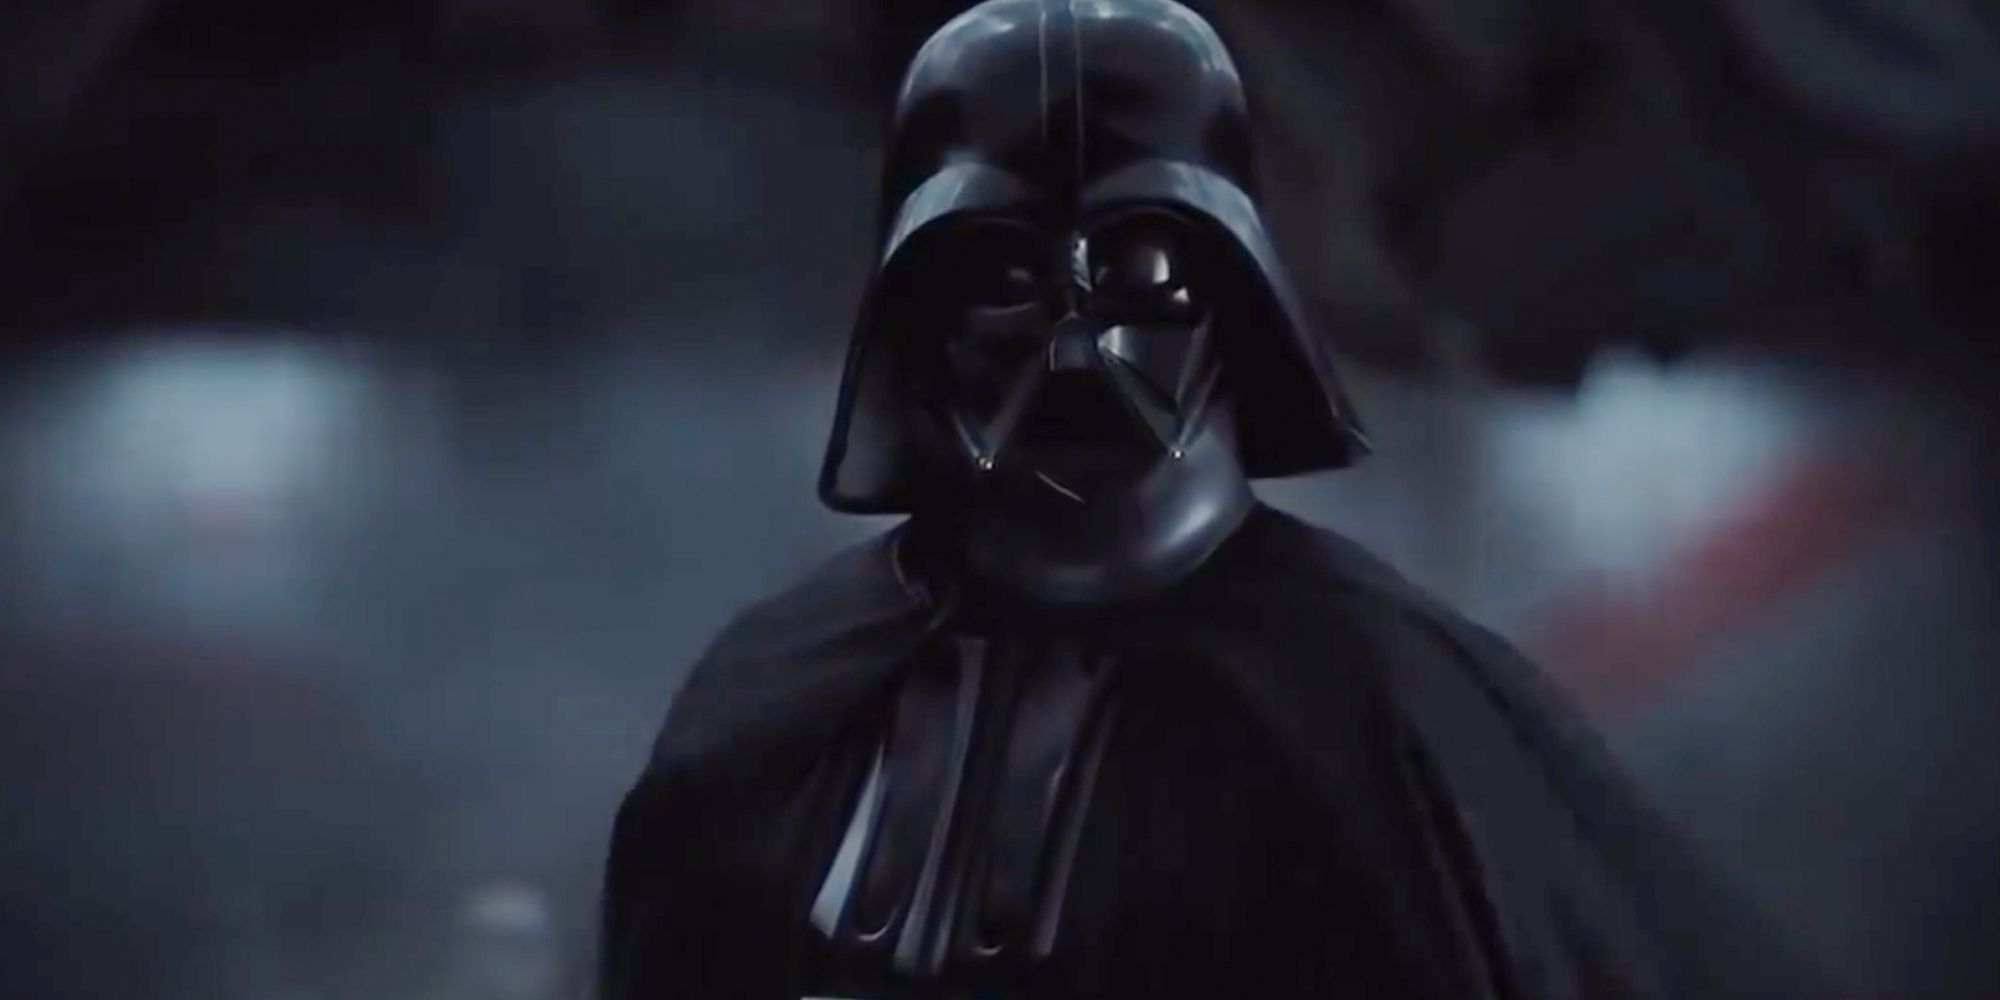 Darth Vader in the Rogue One Final Scene